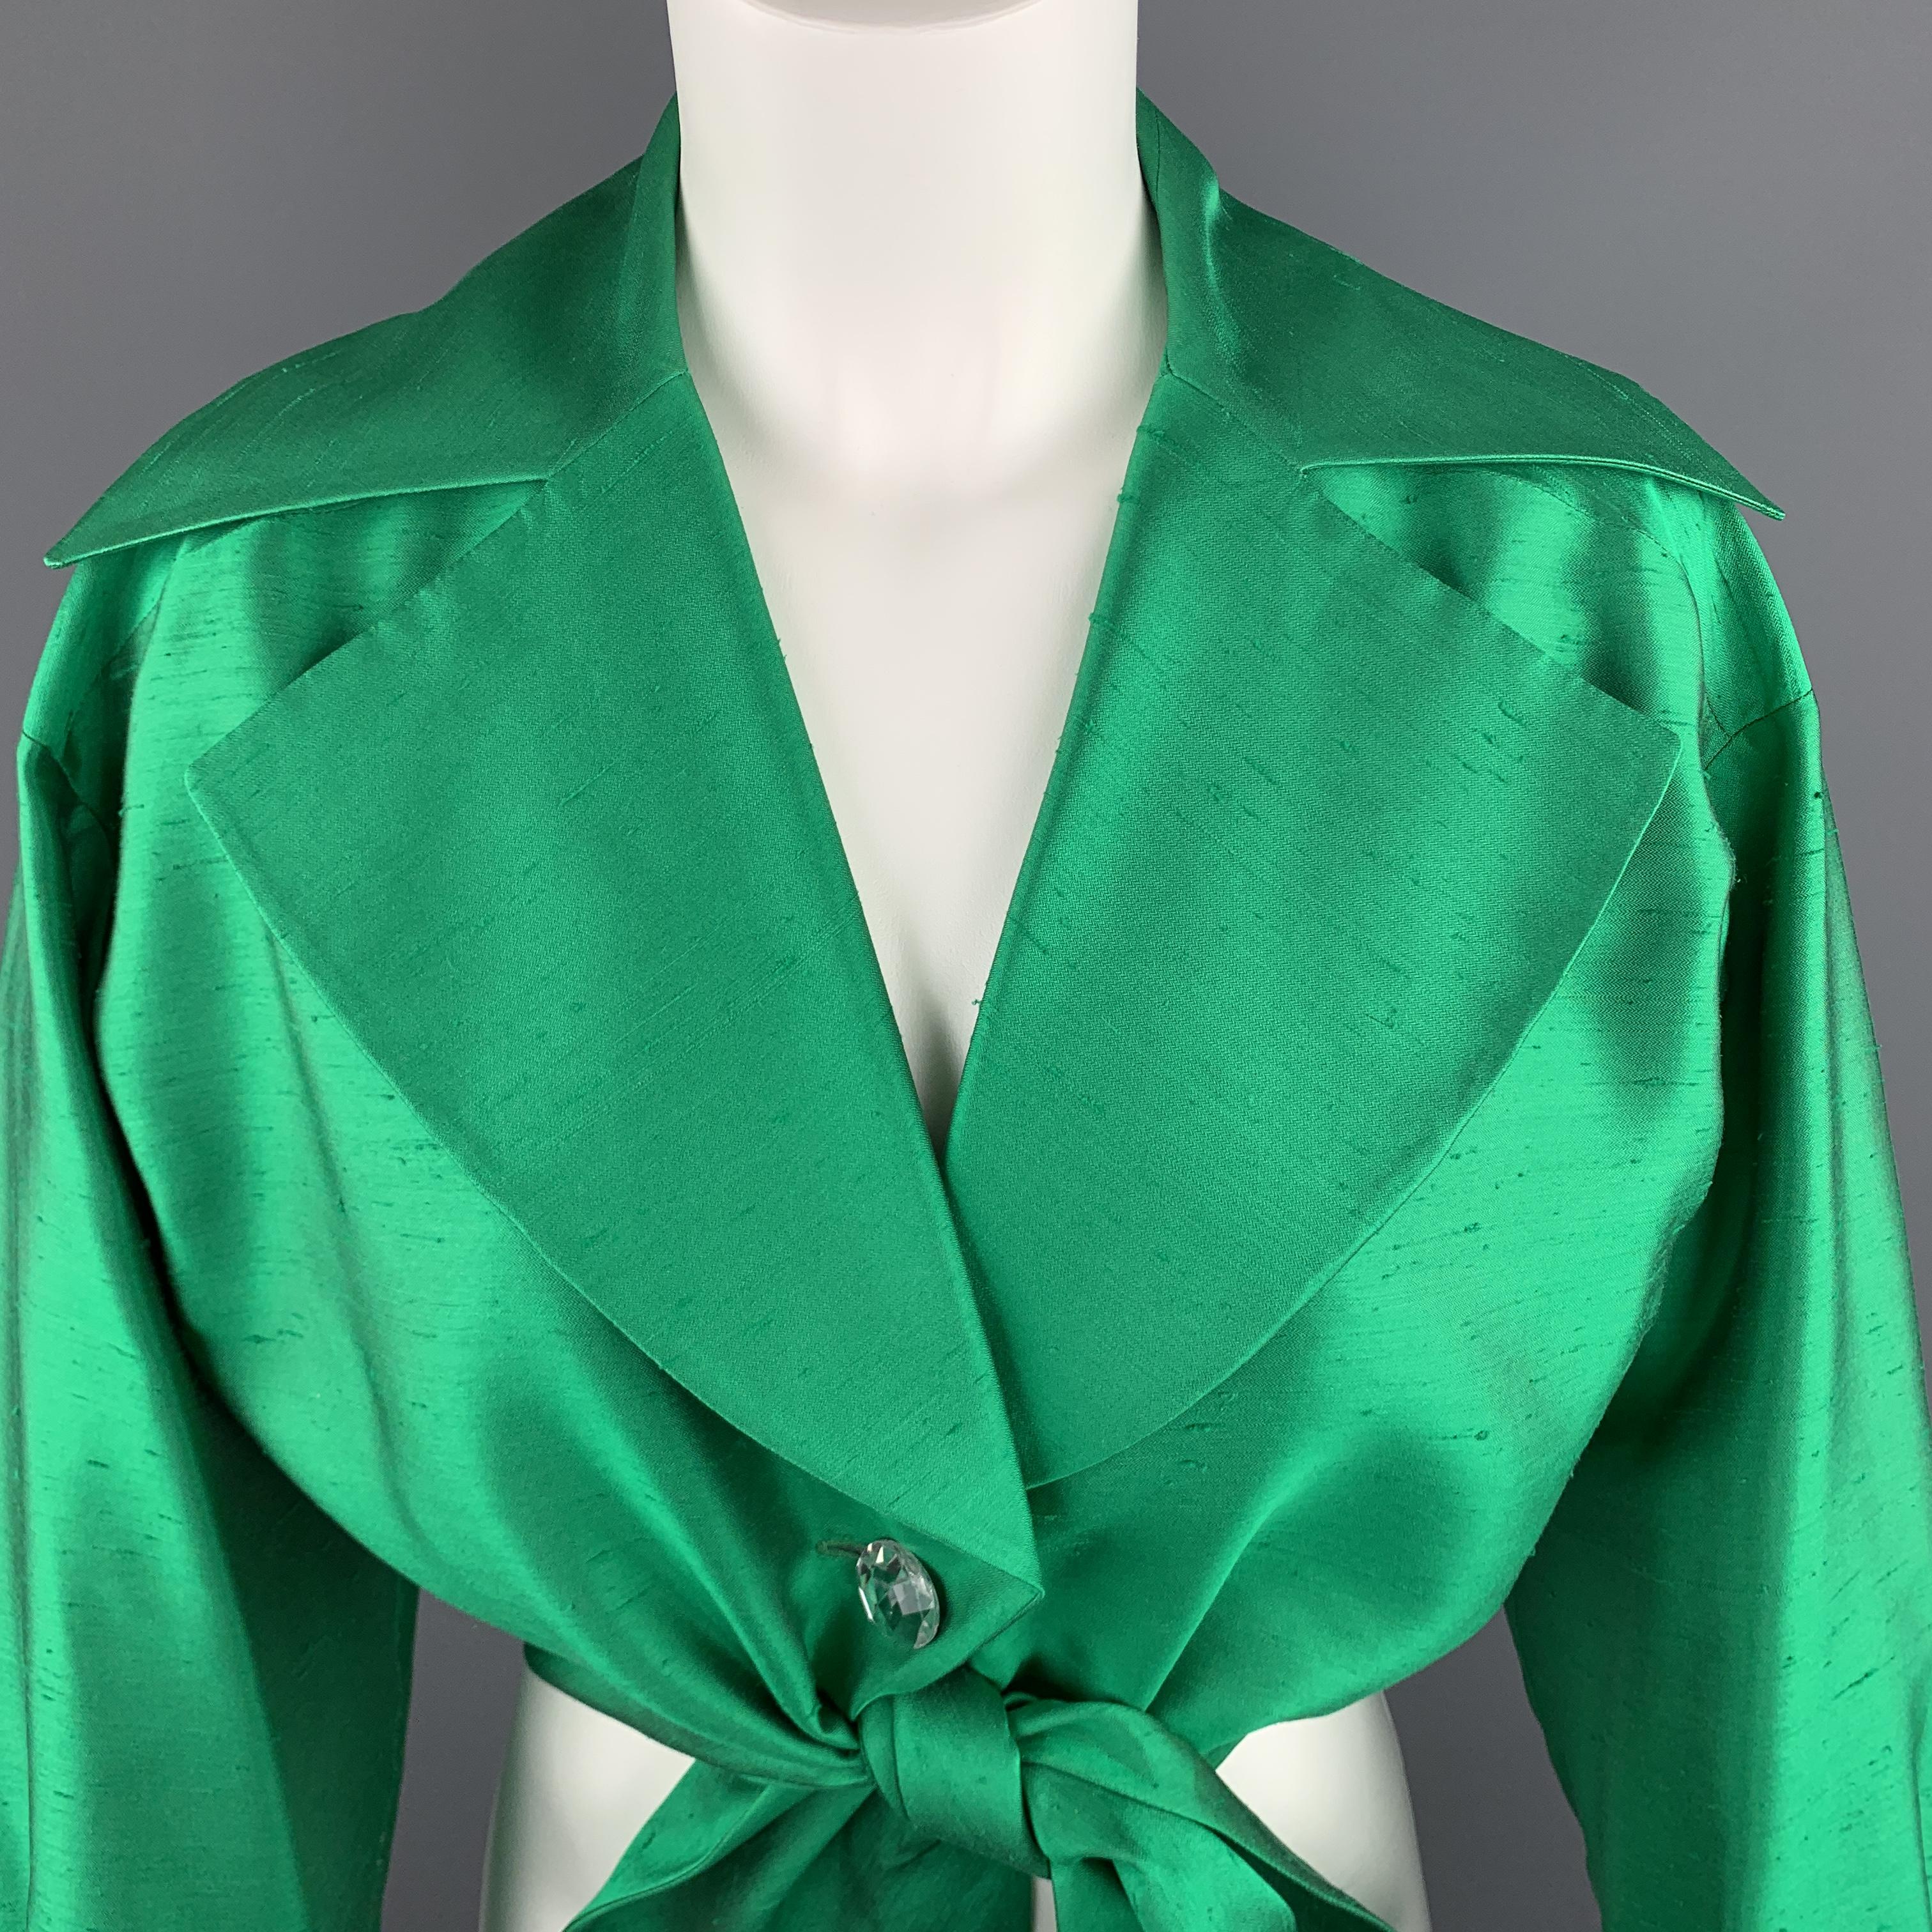 Vintage INES de la FRESSANGE dress top comes in vibrant emerald jewel green silk Shantung with a wide pointed collar lapel, clear rhinestone buttons, and cropped tie front. Made in France.

Excellent Pre-Owned Condition.
Marked: FR